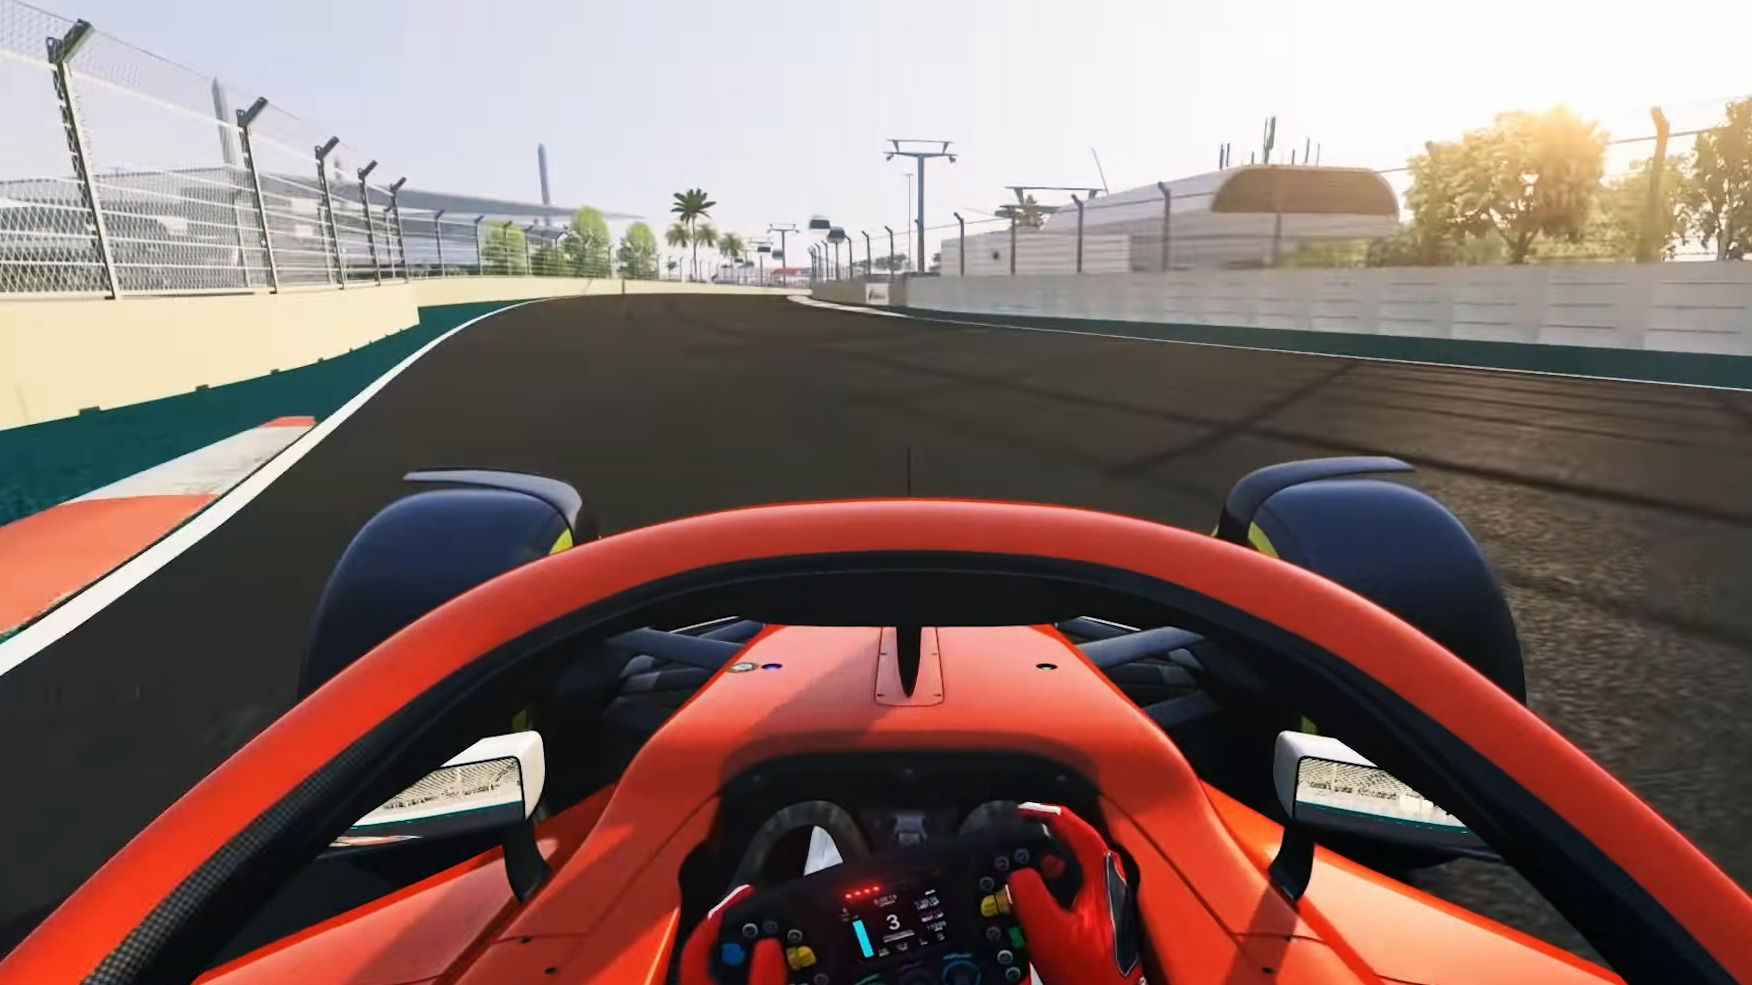 Video: Onboard lap simulation of F1 track for 2022 Miami GP · RaceFans